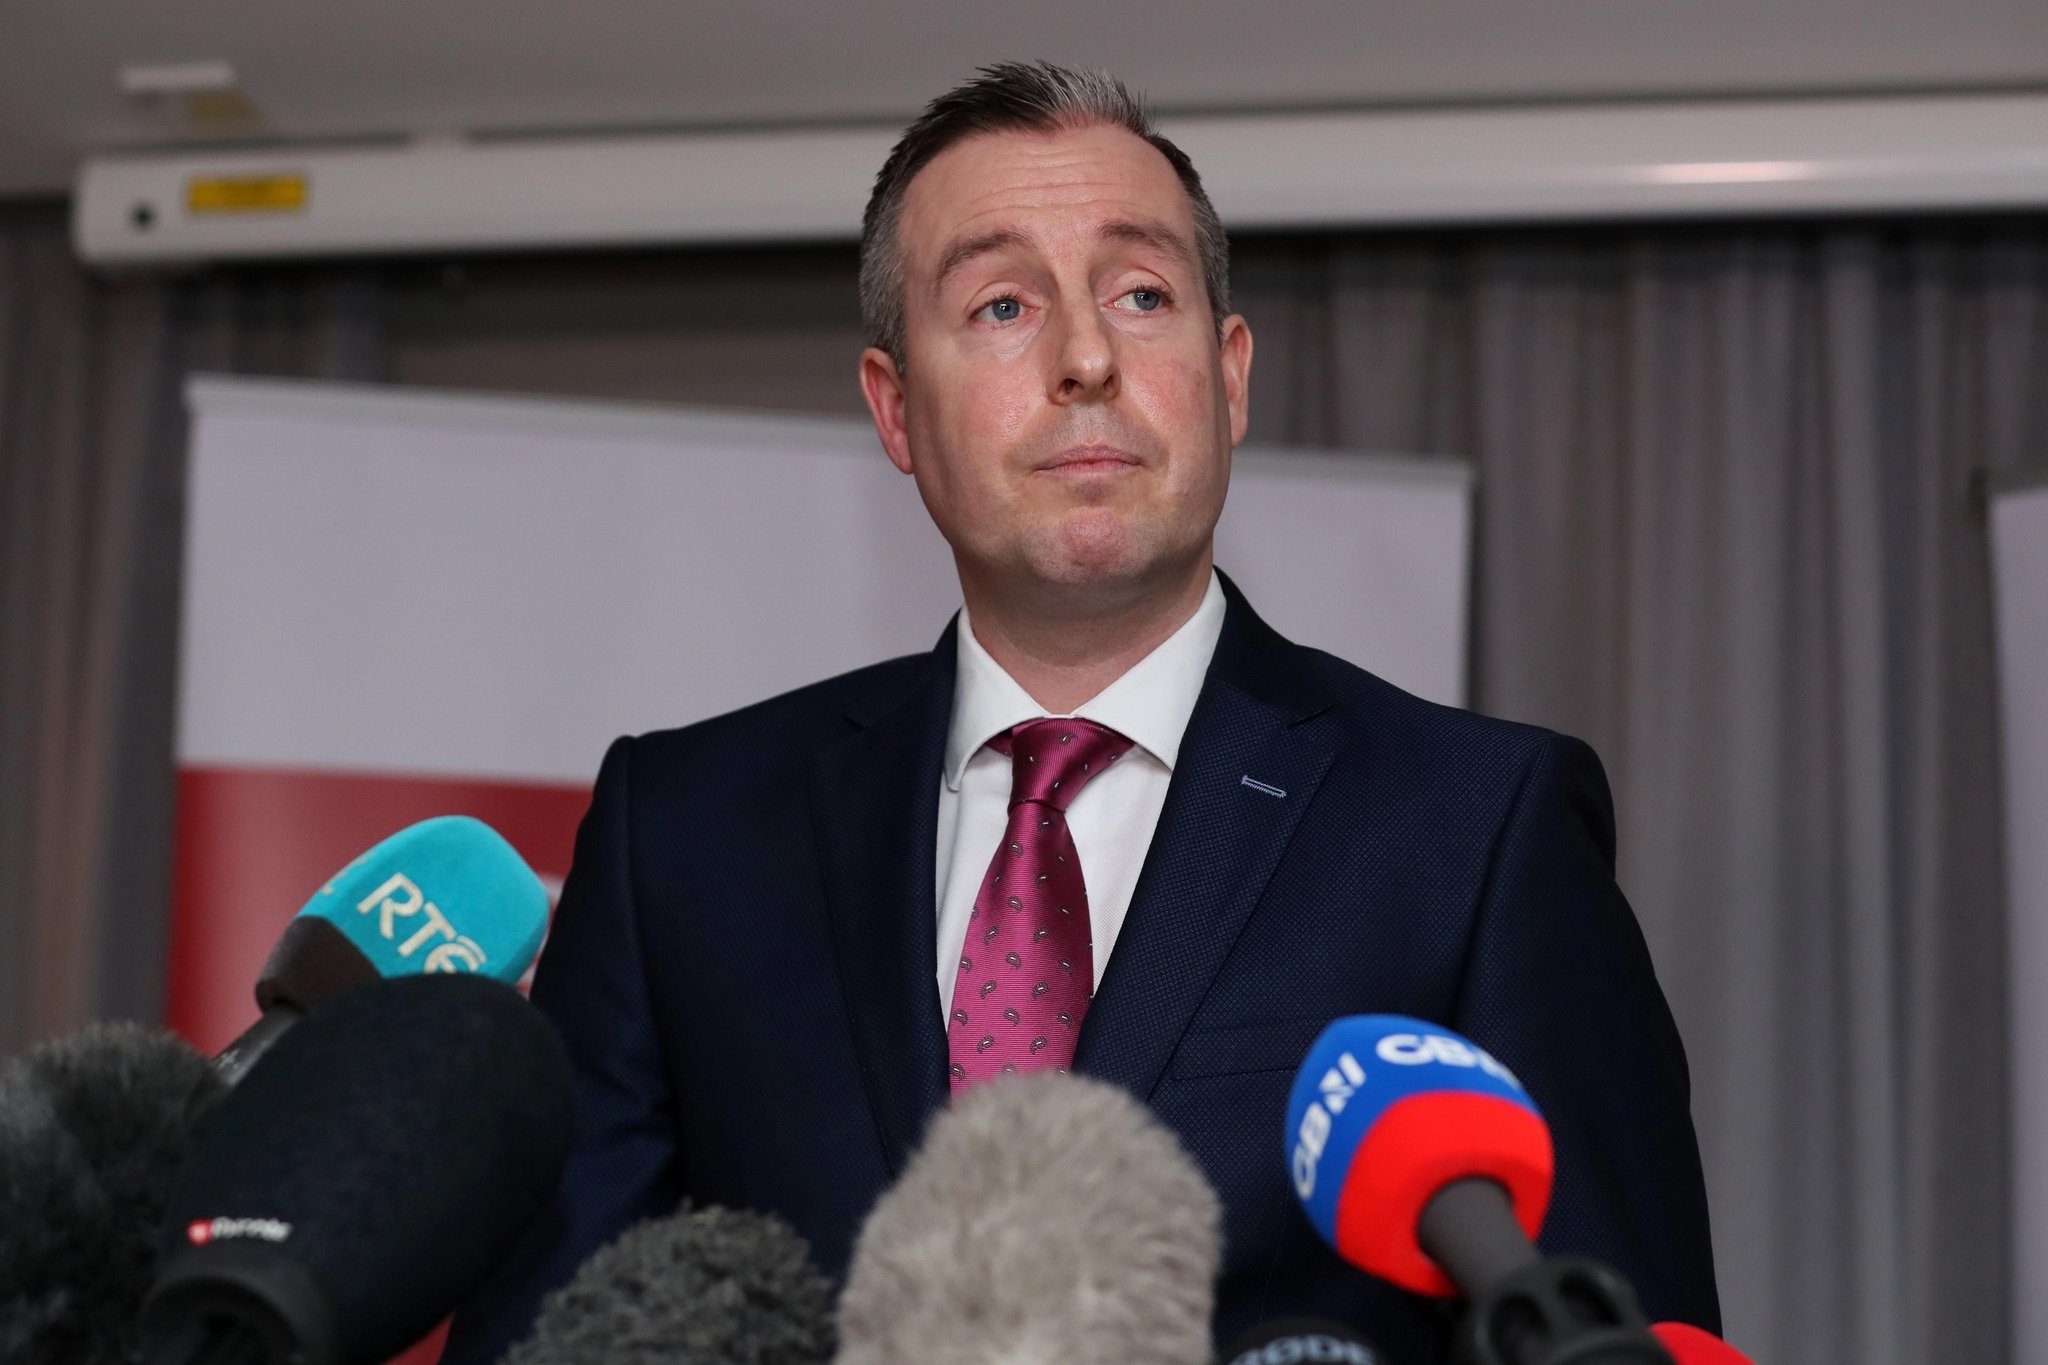 Owen Polley: The Stormont executive has failed over years, not just a few weeks